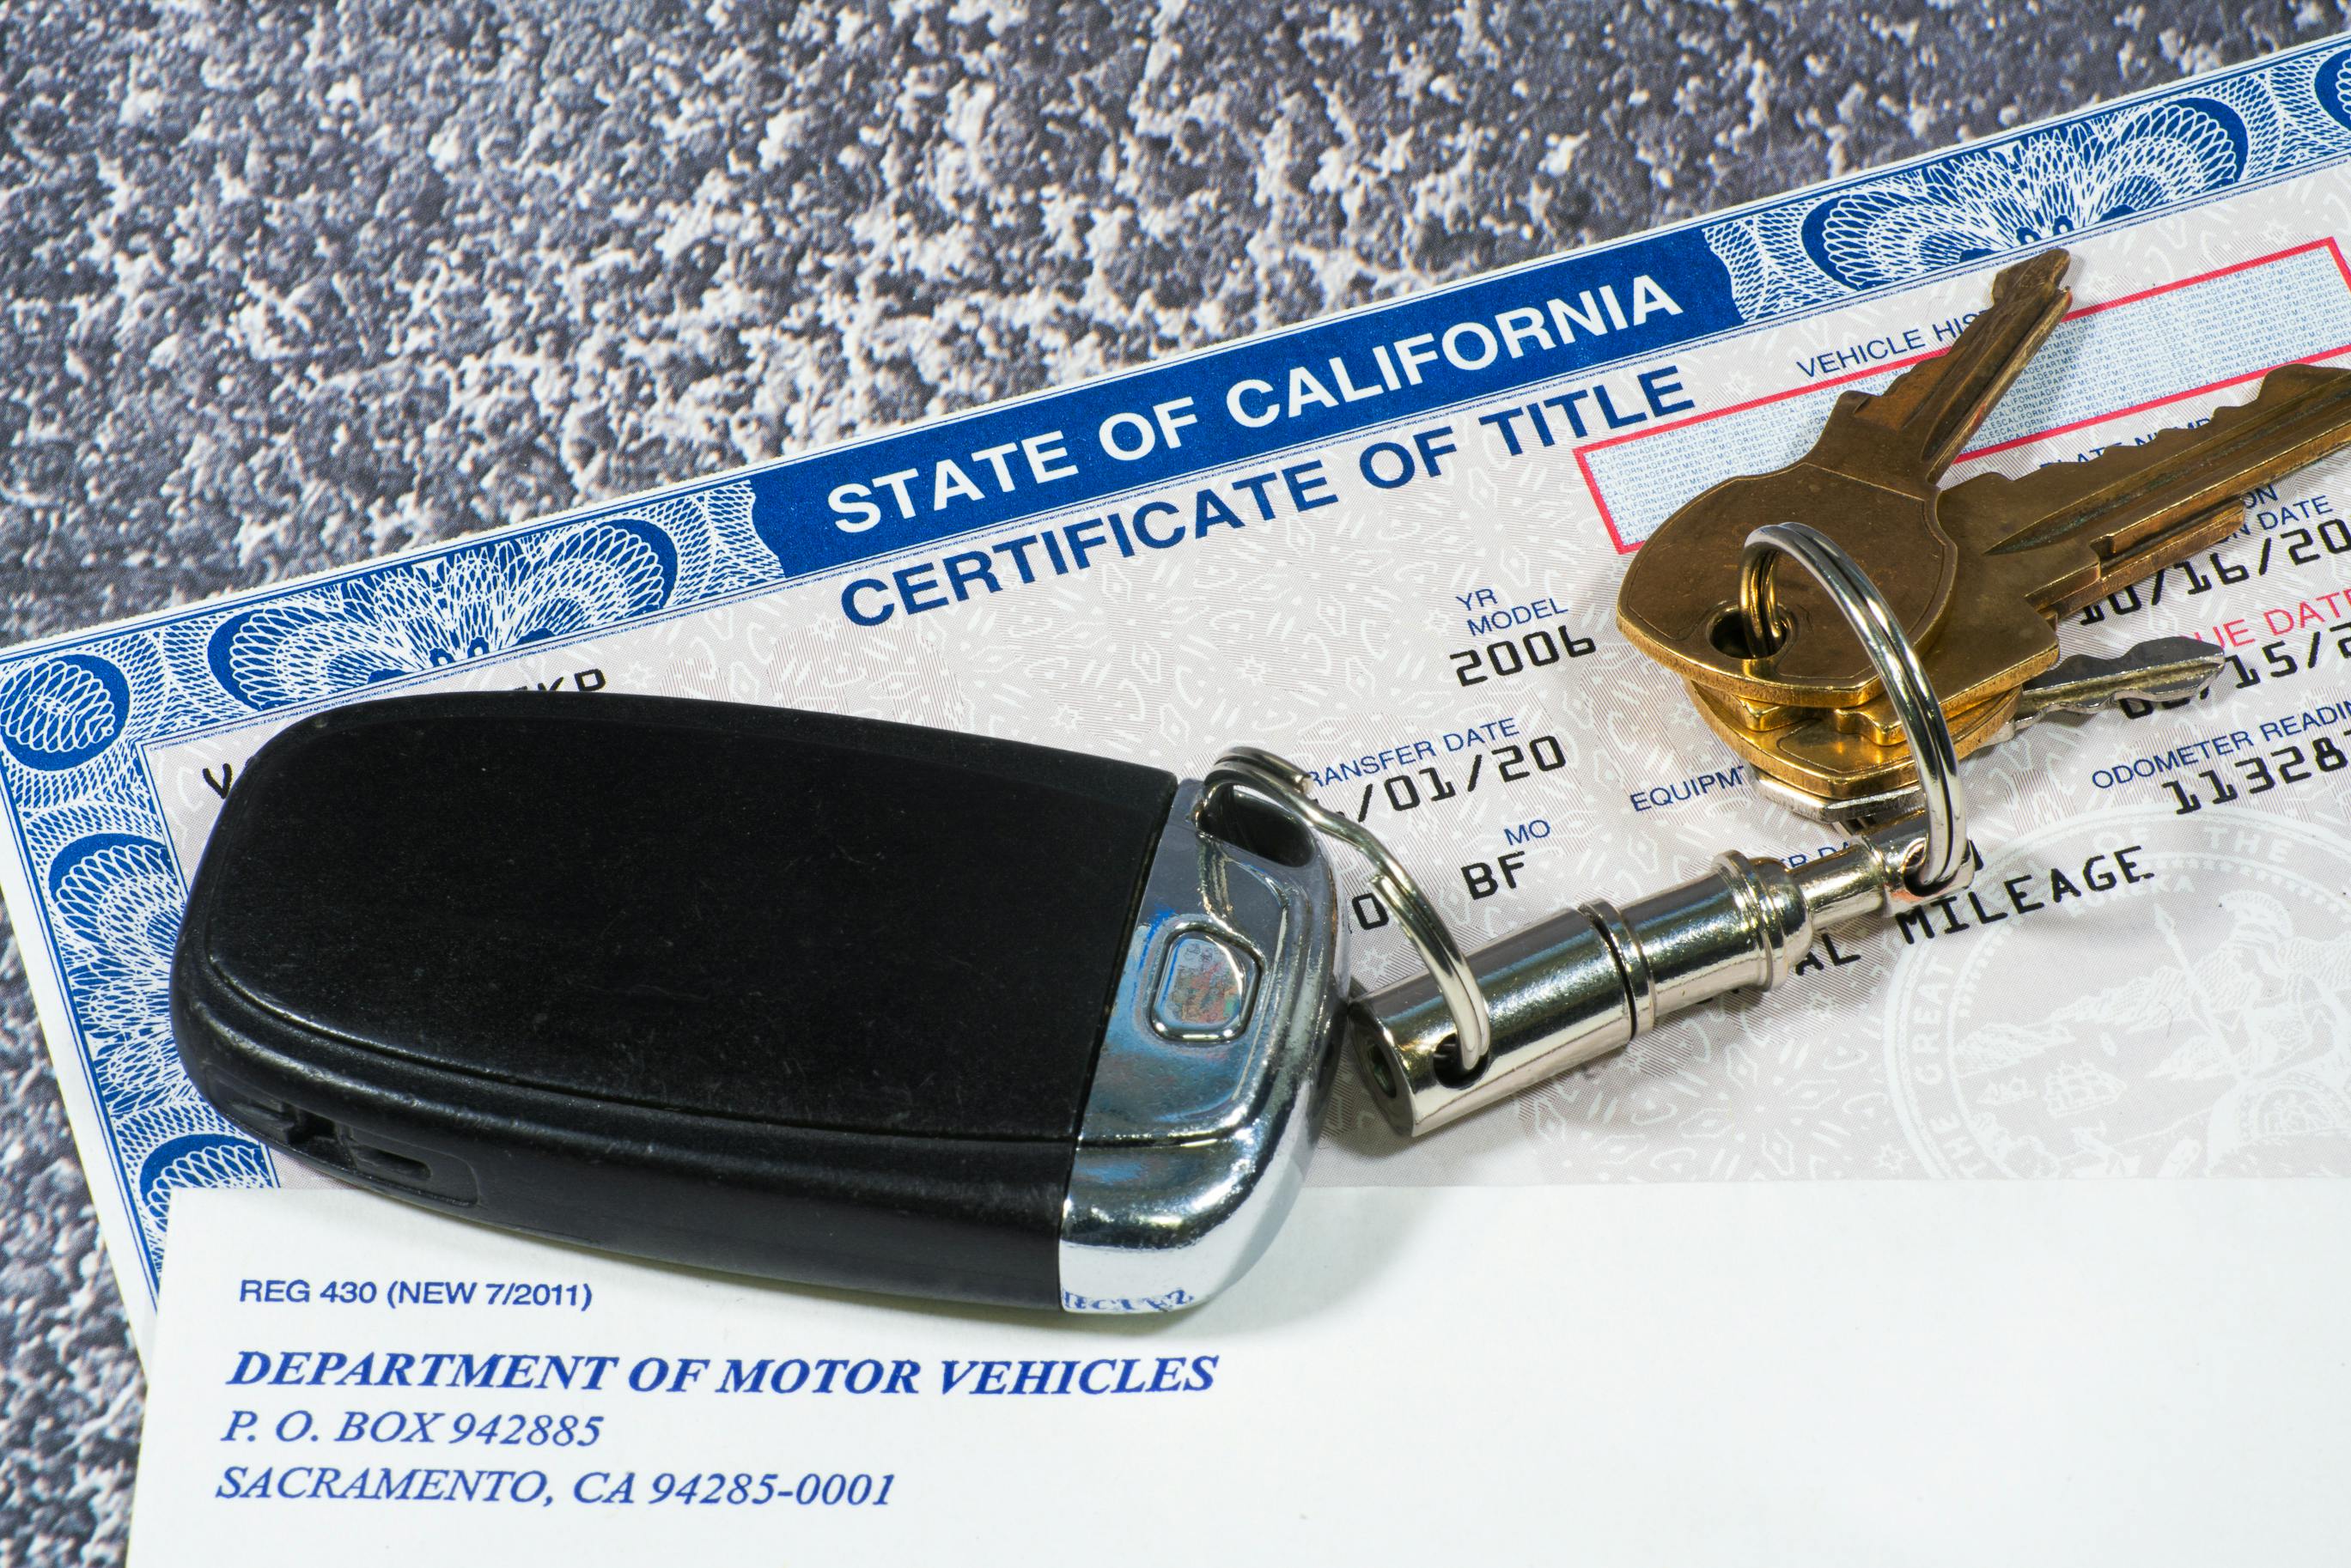 Keys to a vehicle on top of the Certificate of Title from the CA DMV